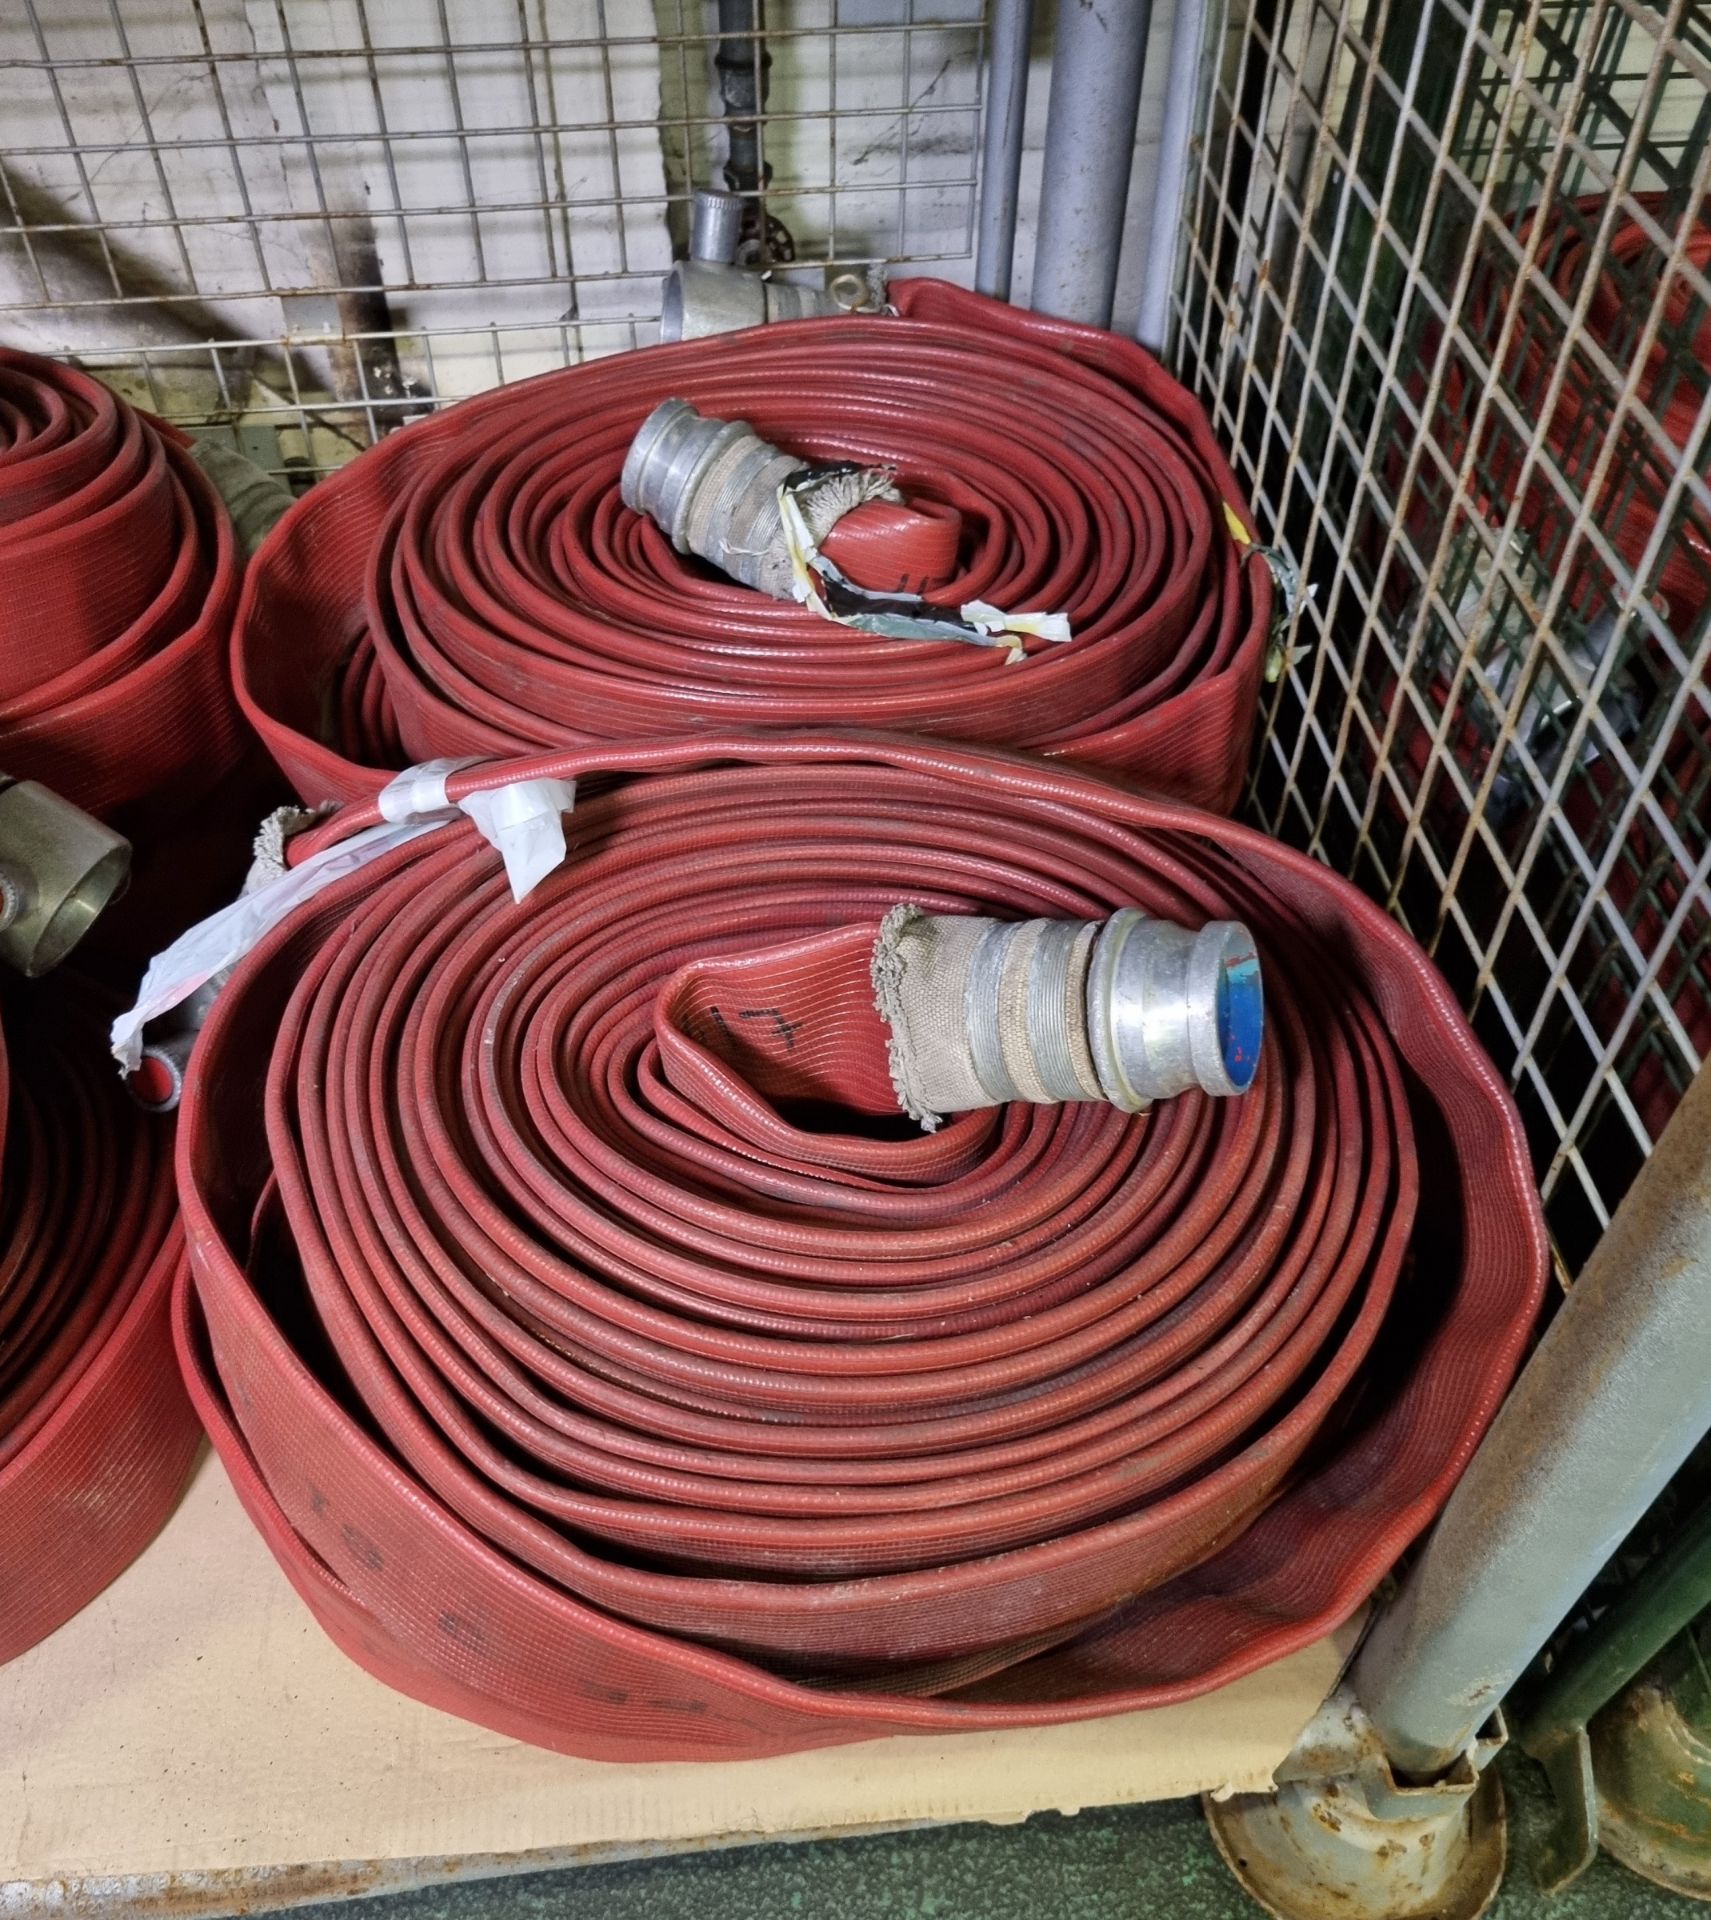 8x Angus Duraline 70mm lay flat hoses with couplings - approx 23 M in length - Image 3 of 5